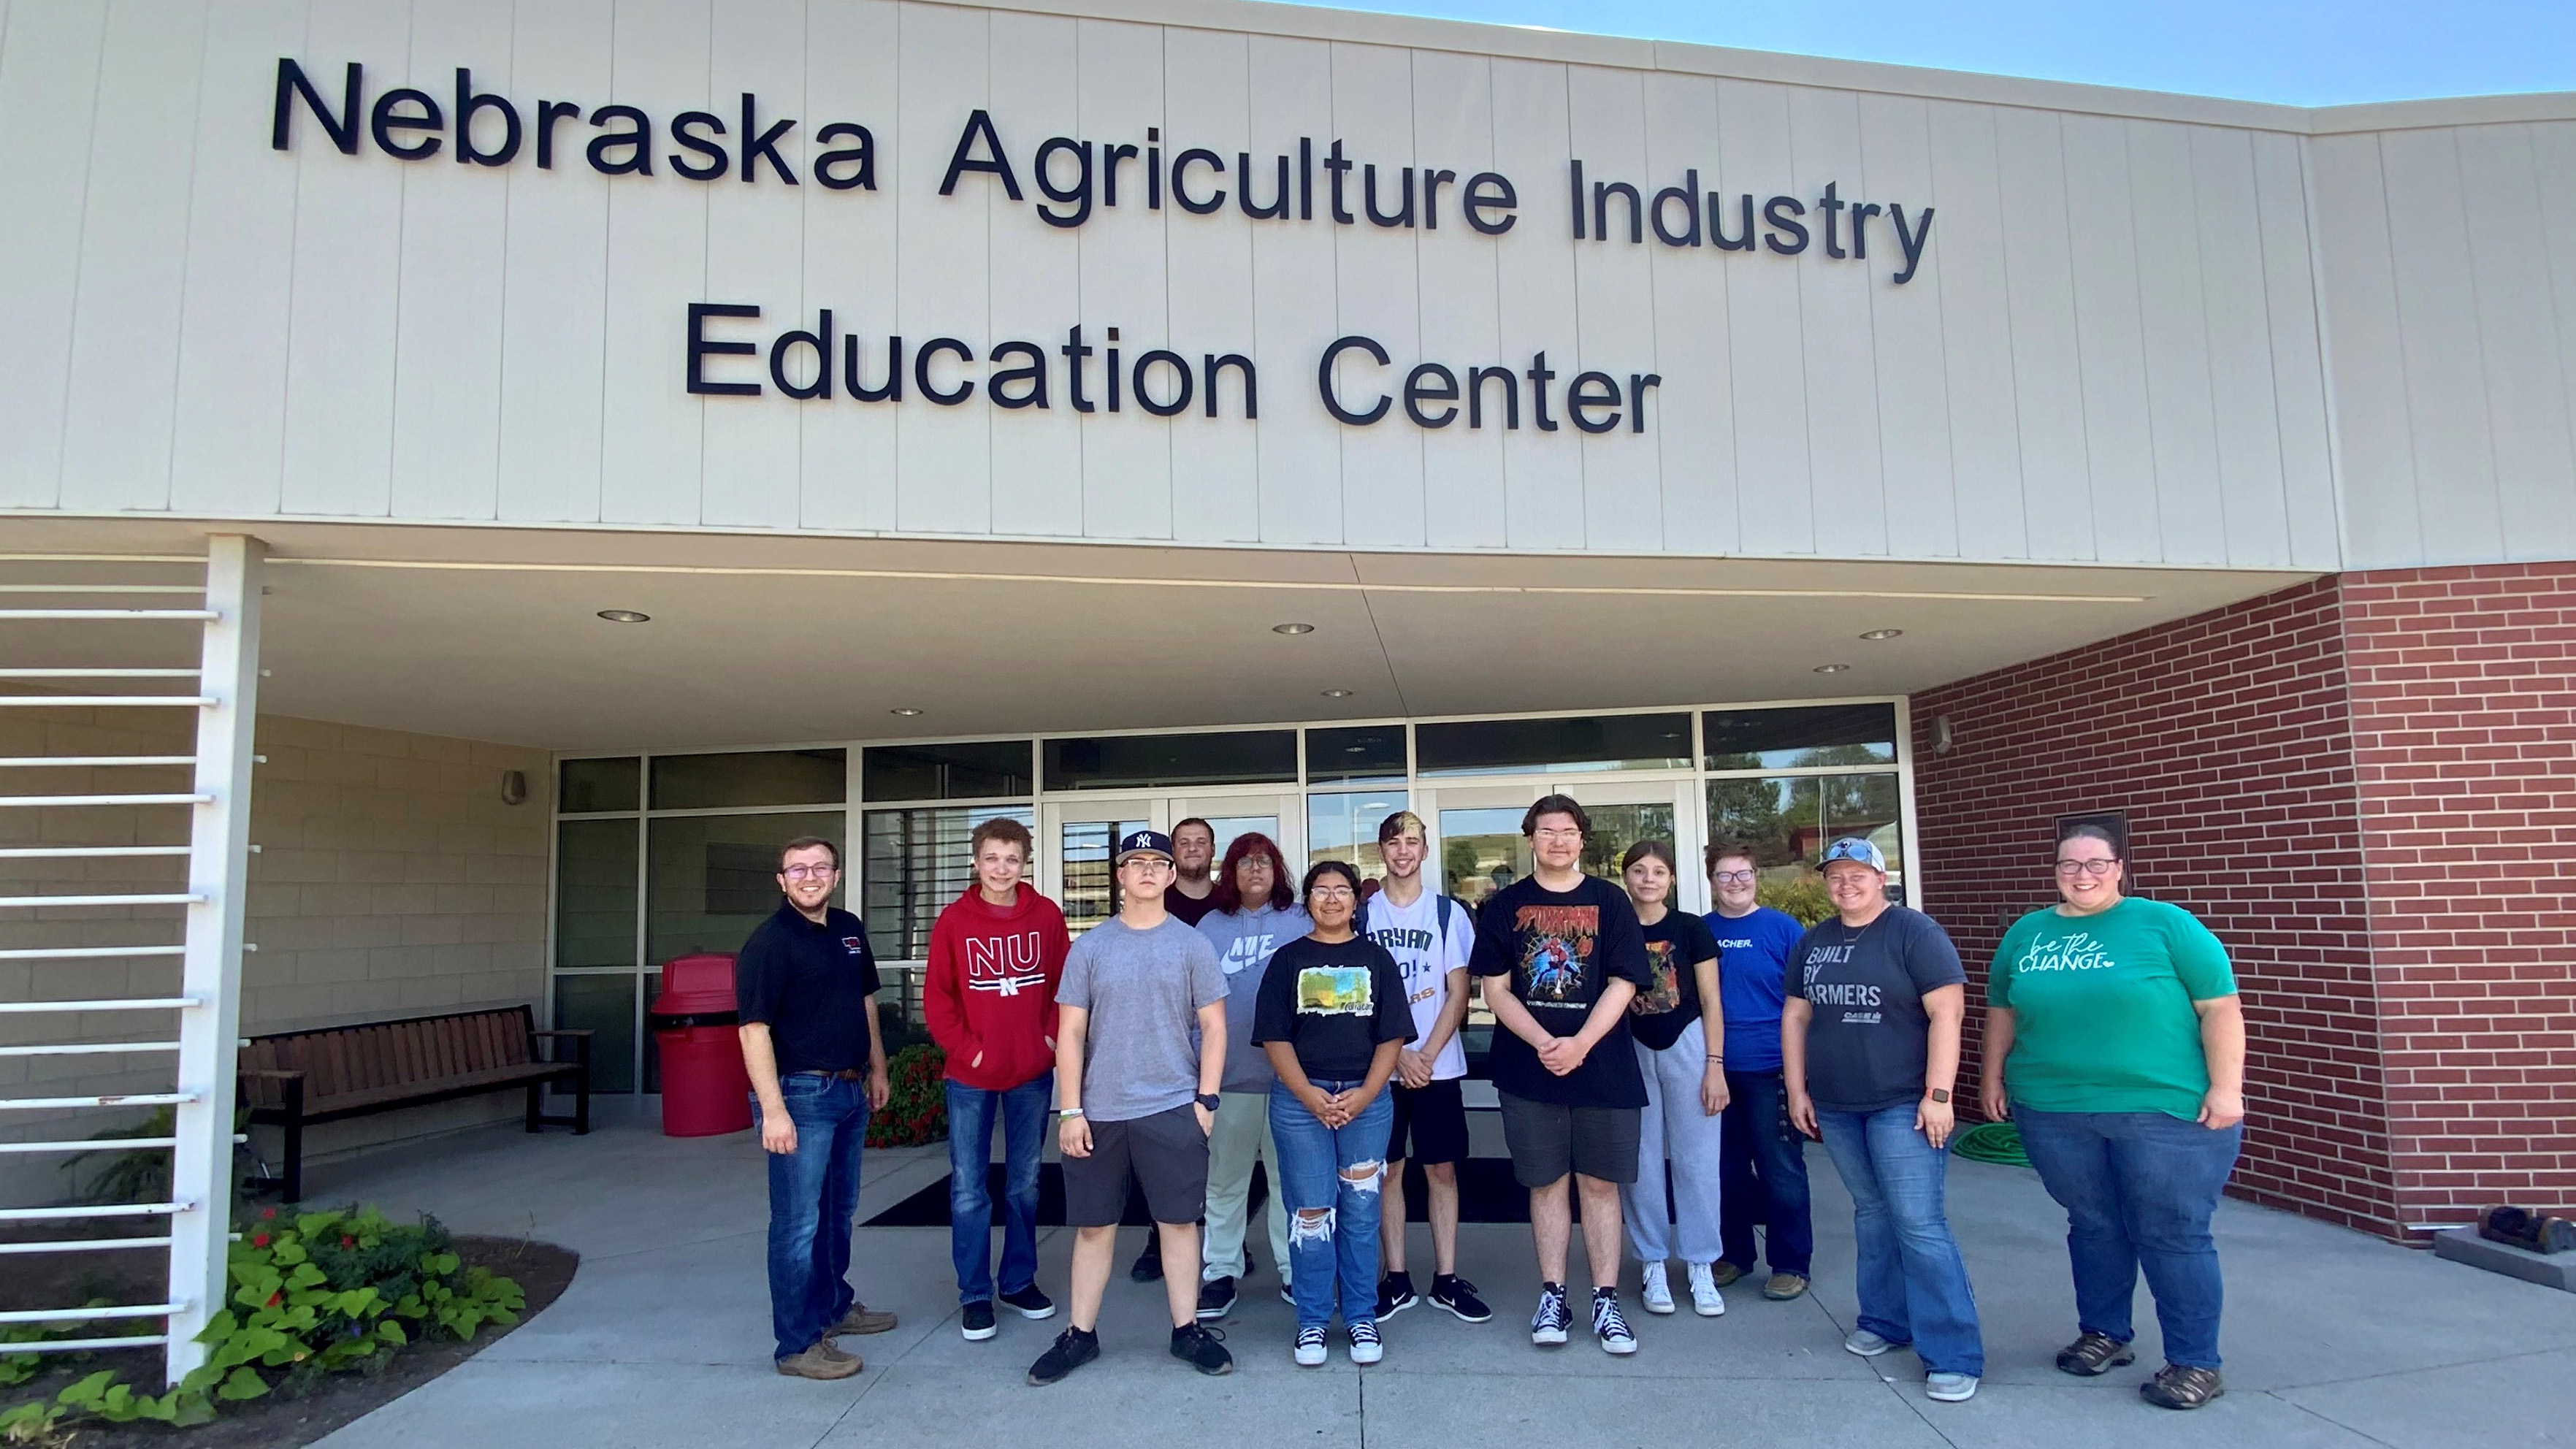 Students from Omaha Bryan High School visited NCTA on Sept. 2 in conjunction with their visit to the Nebraska State Fair. Omaha Bryan has an agriculture program and FFA chapter. (Andela Taylor / NCTA)